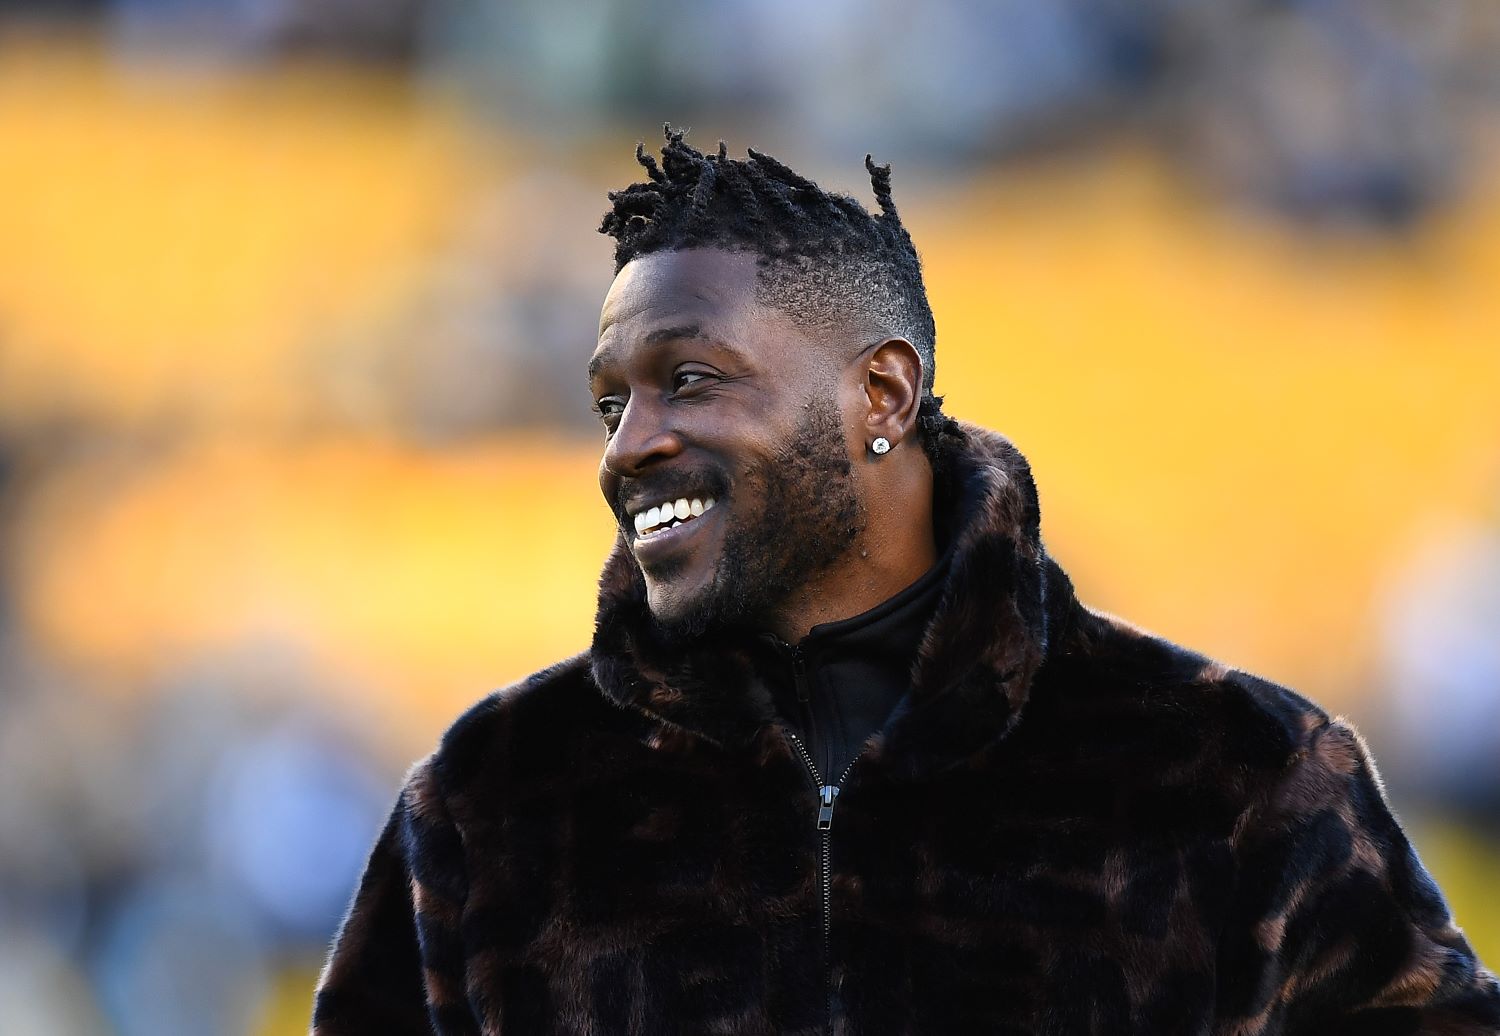 Antonio Brown will have to stay out of trouble and stay on the field if he wants to maximize his earnings with the Tampa Bay Buccaneers.